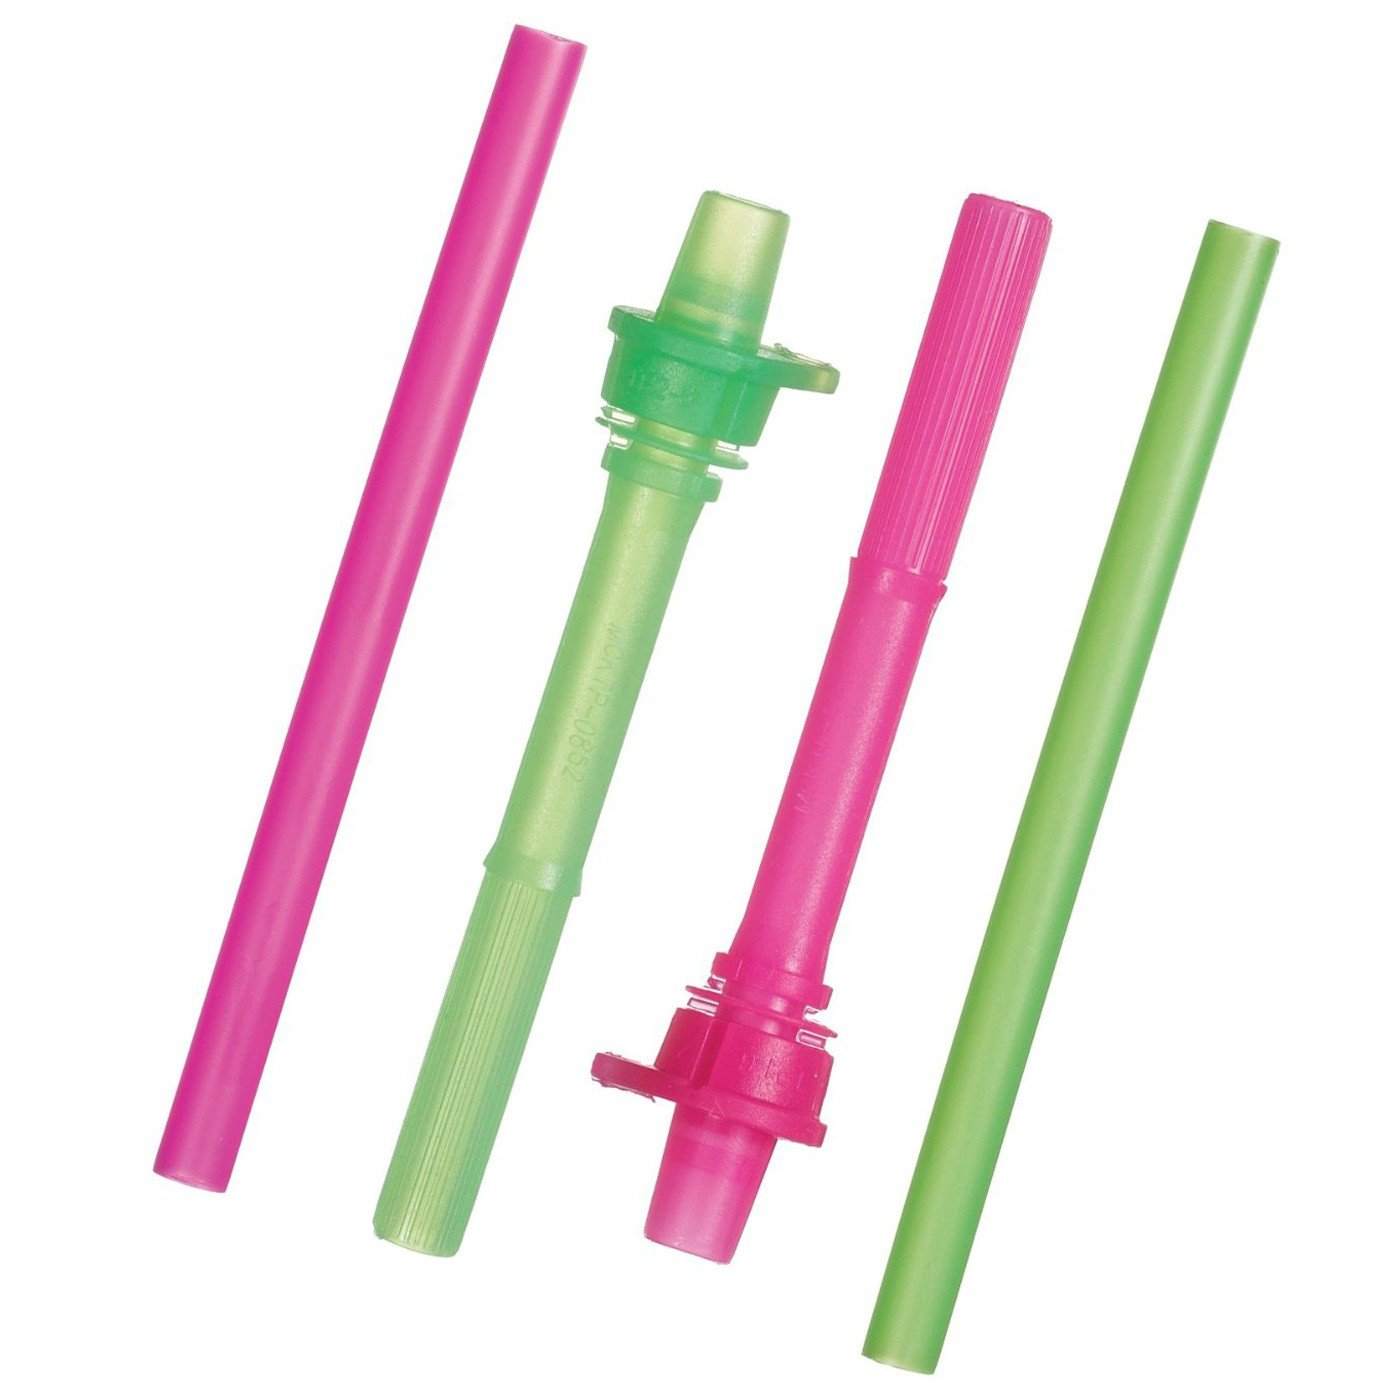 Munchkin Click Lock Replacement Straws with Valves